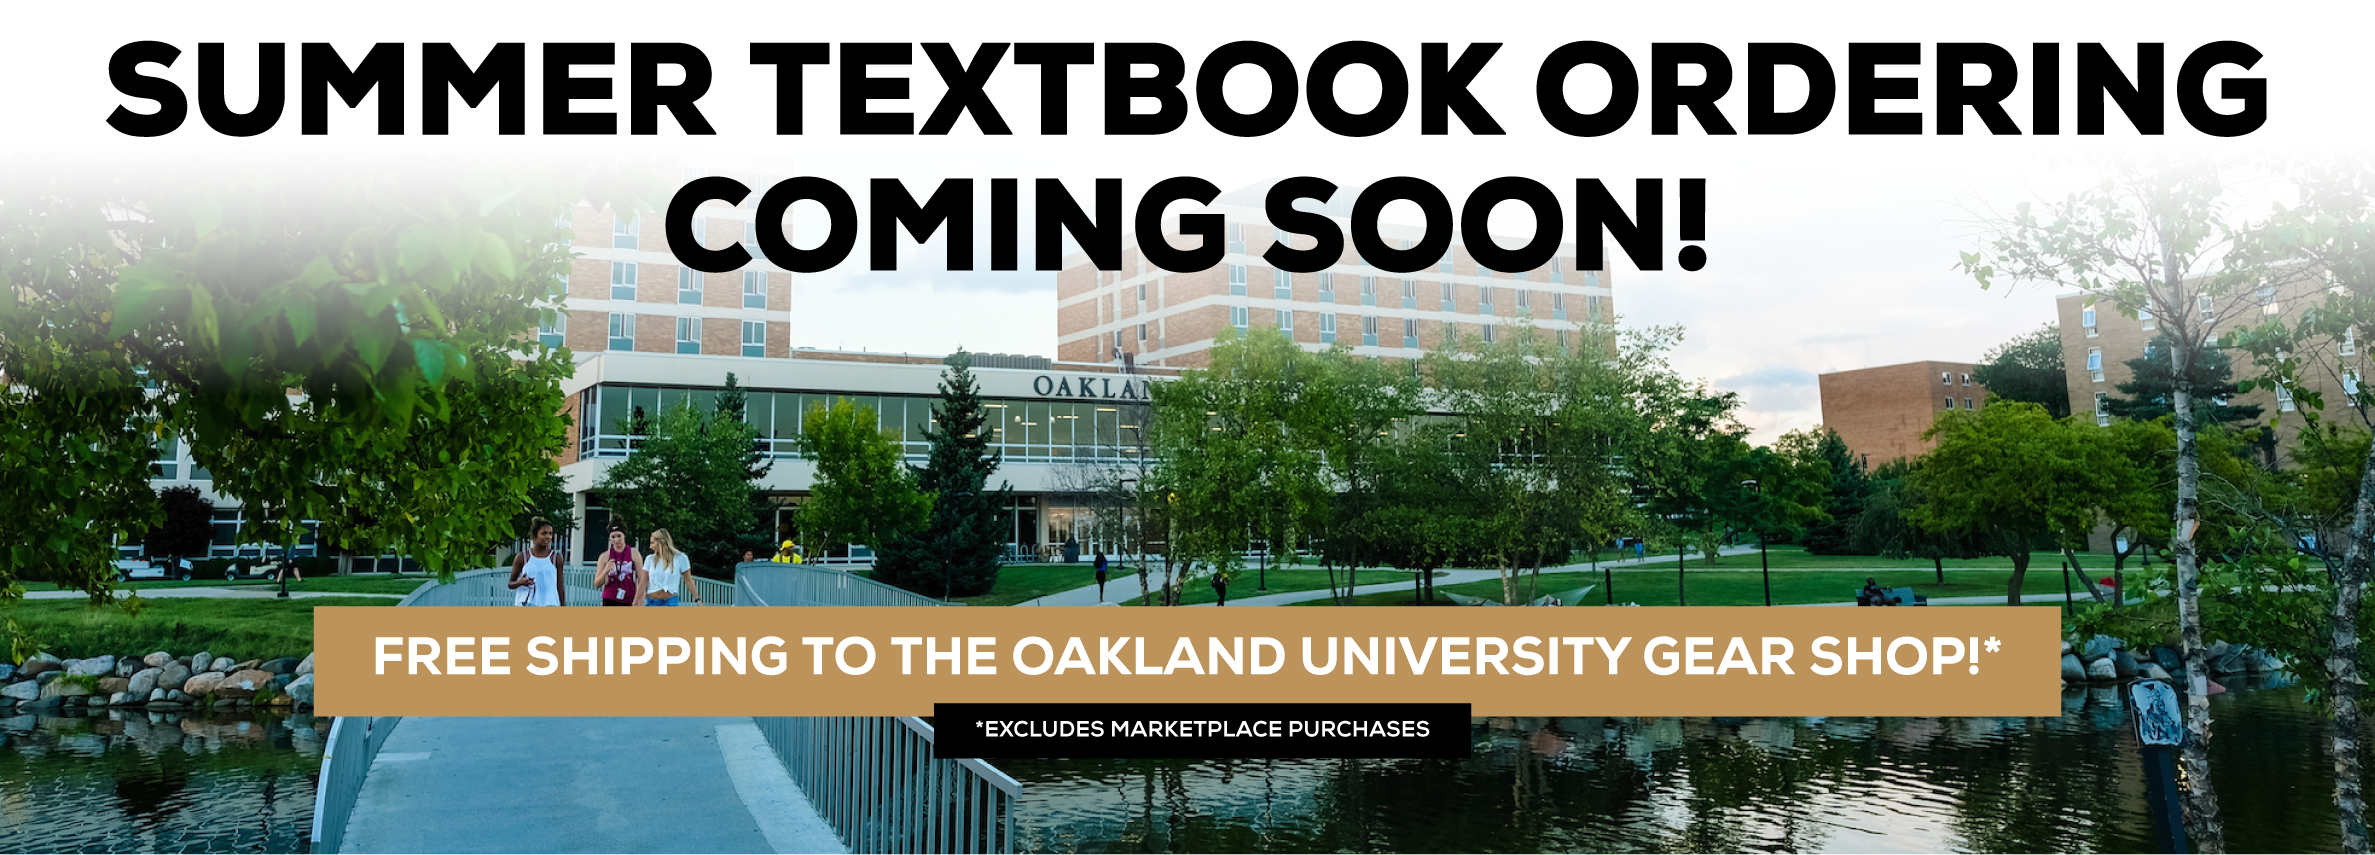 Coming Soon! Your New Official Online Bookstore. Free Shipping to the Oakland University Gear Shop!* Excludes Marketplace Purchases